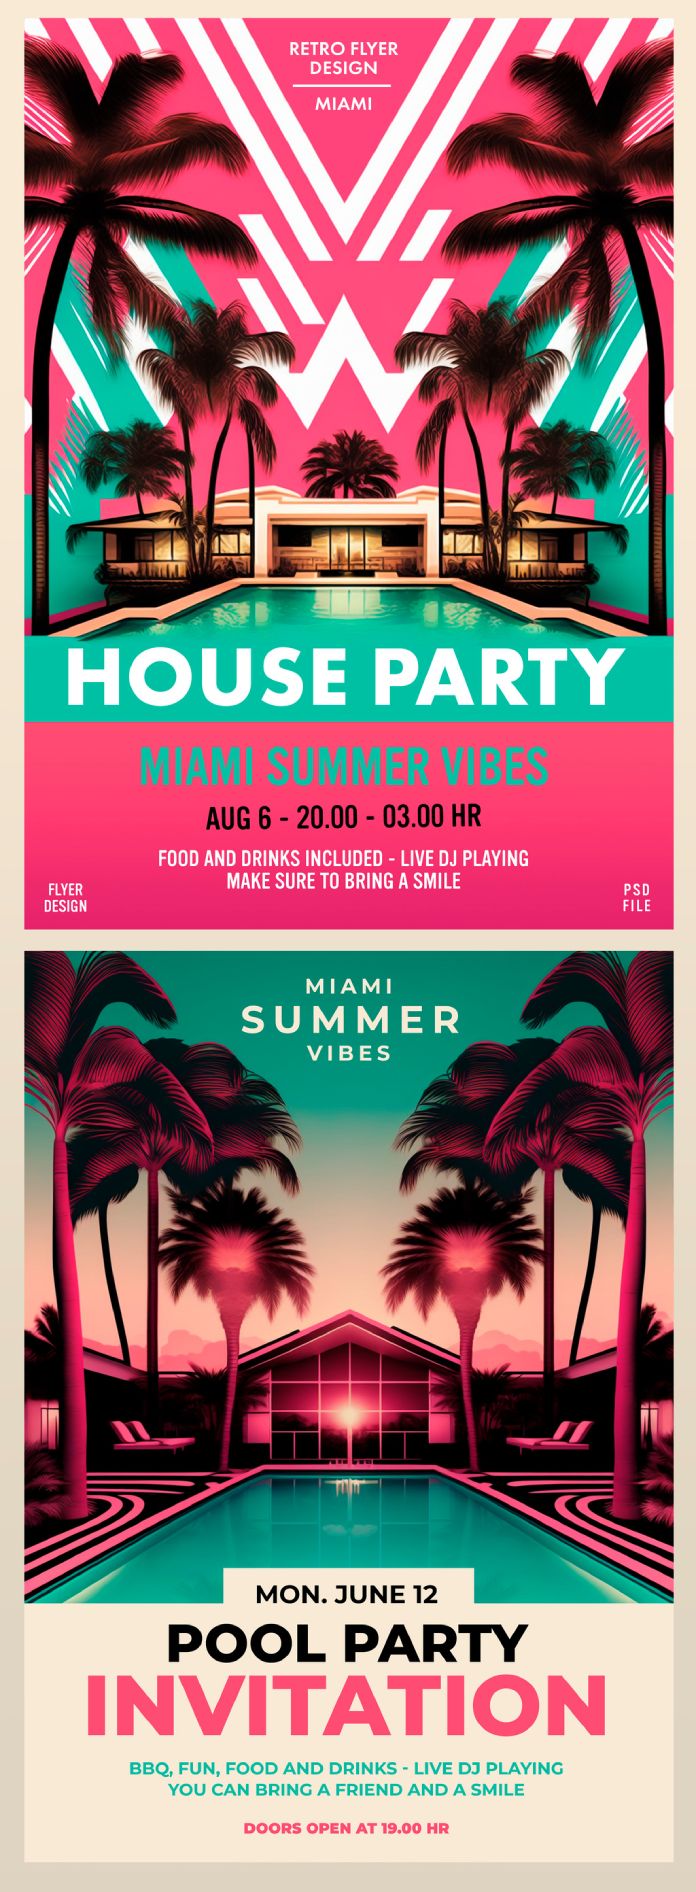 Customizable Retro Pool Party Flyers for Adobe Photoshop